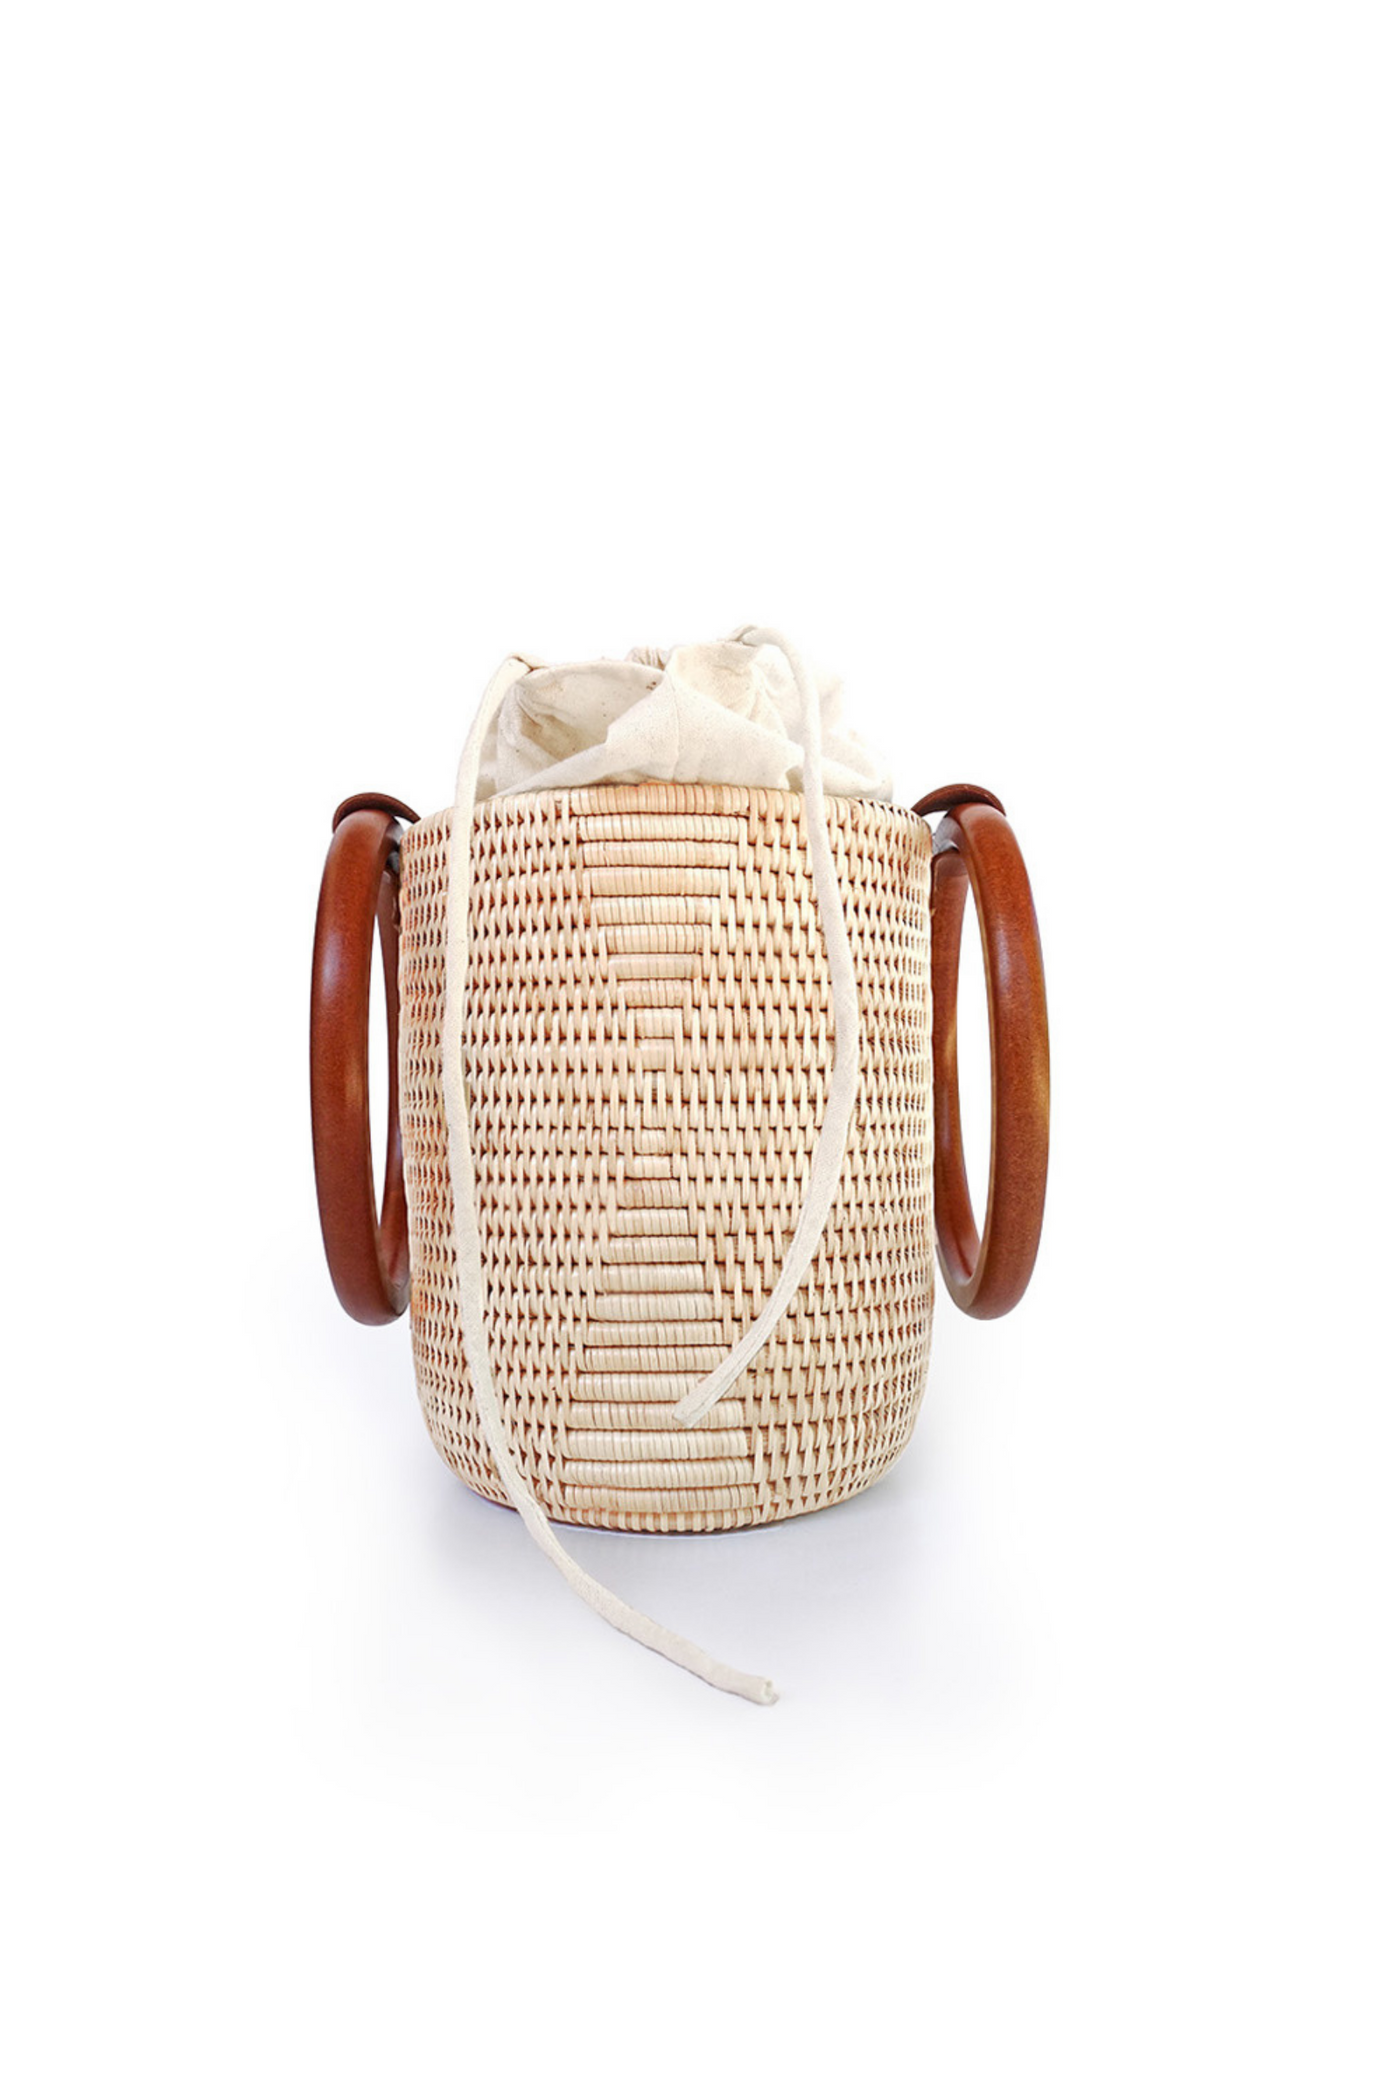 Manava Maly Bucket Bag, available on ZERRIN with free Singapore shipping